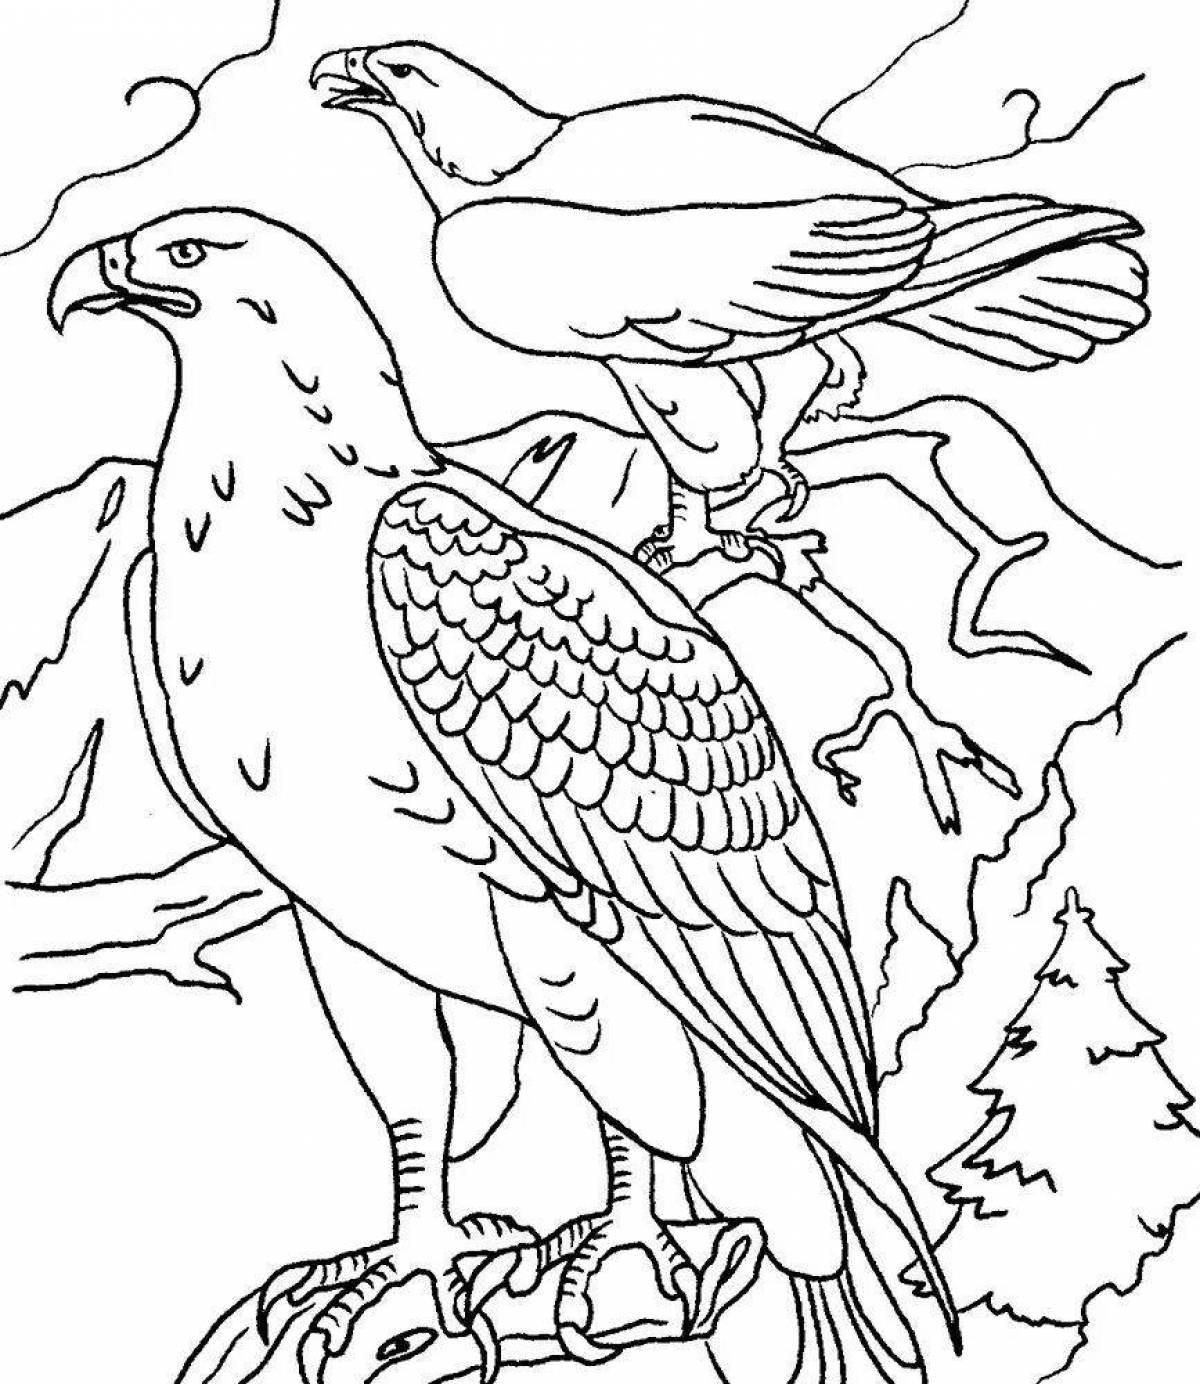 Cute animal and bird coloring pages